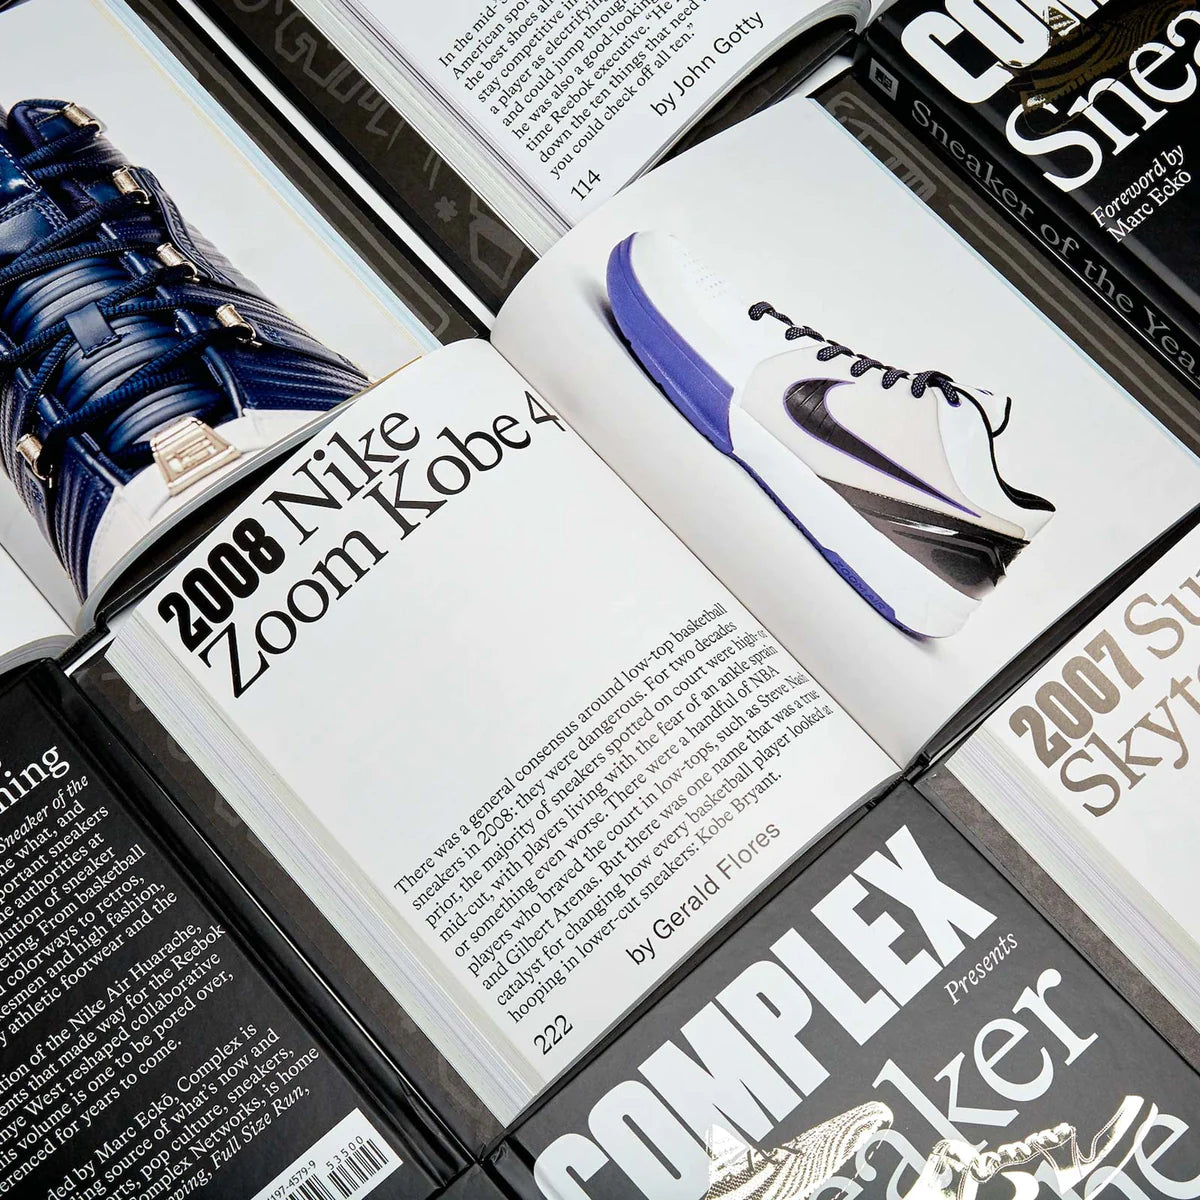 Complex Presents: Sneaker Of The Year